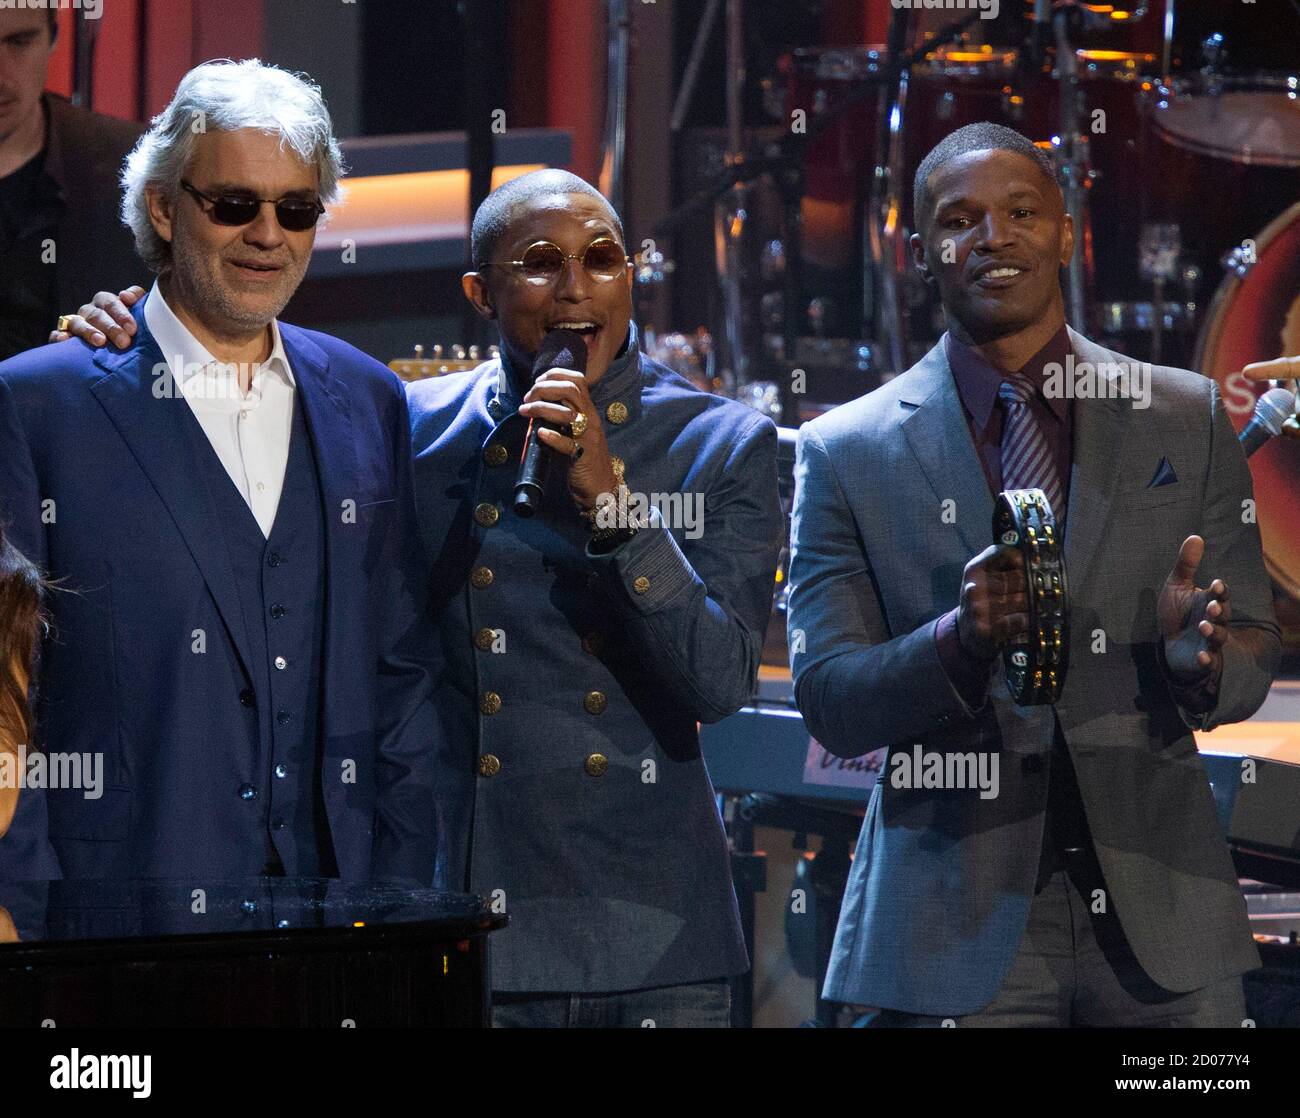 Andrea Bocelli Pharrell Williams And Jamie Foxx L R Sing During The Finale Of The Taping Of The Stevie Wonder Songs In The Key Of Life An All Star Grammy Salute Concert At